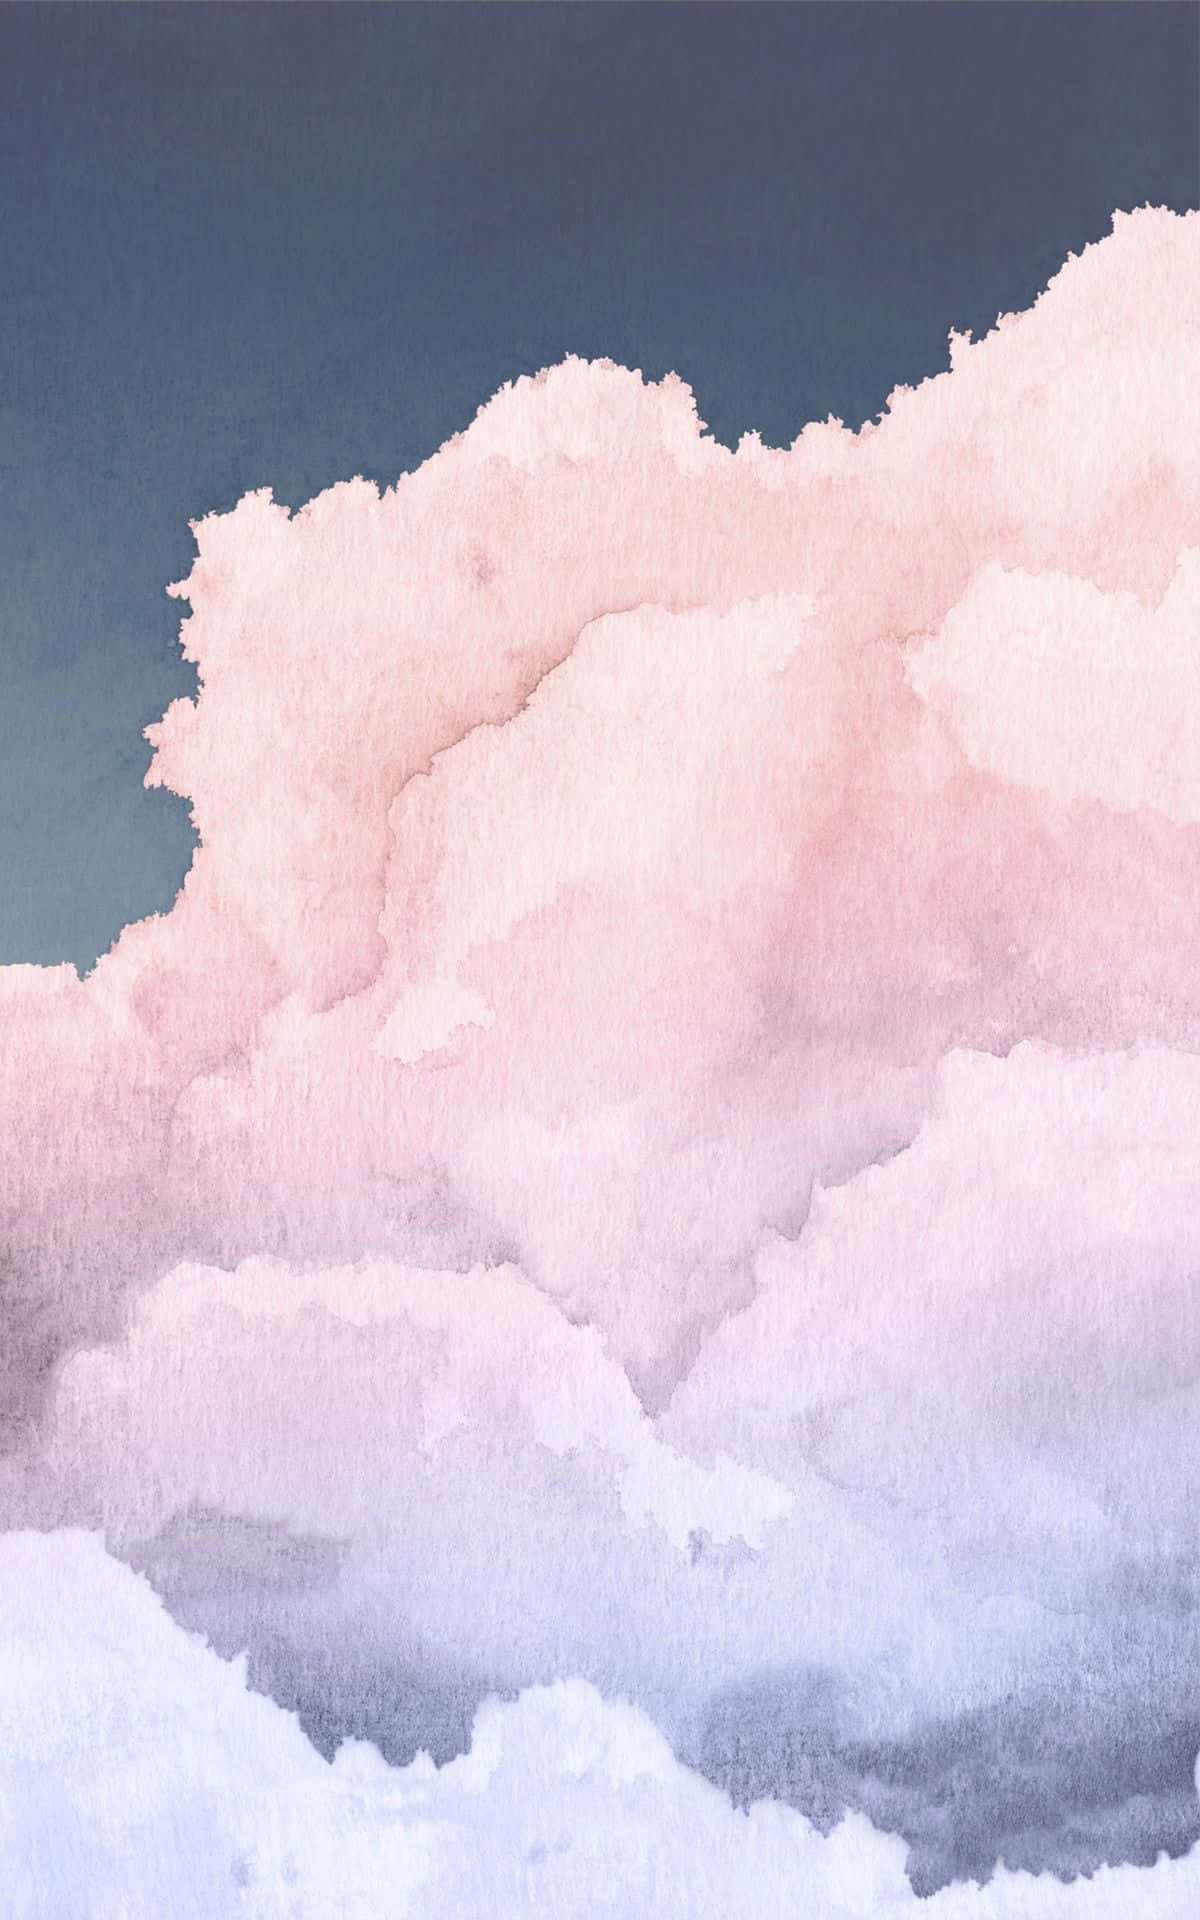 a watercolor painting of clouds in pink and blue Wallpaper